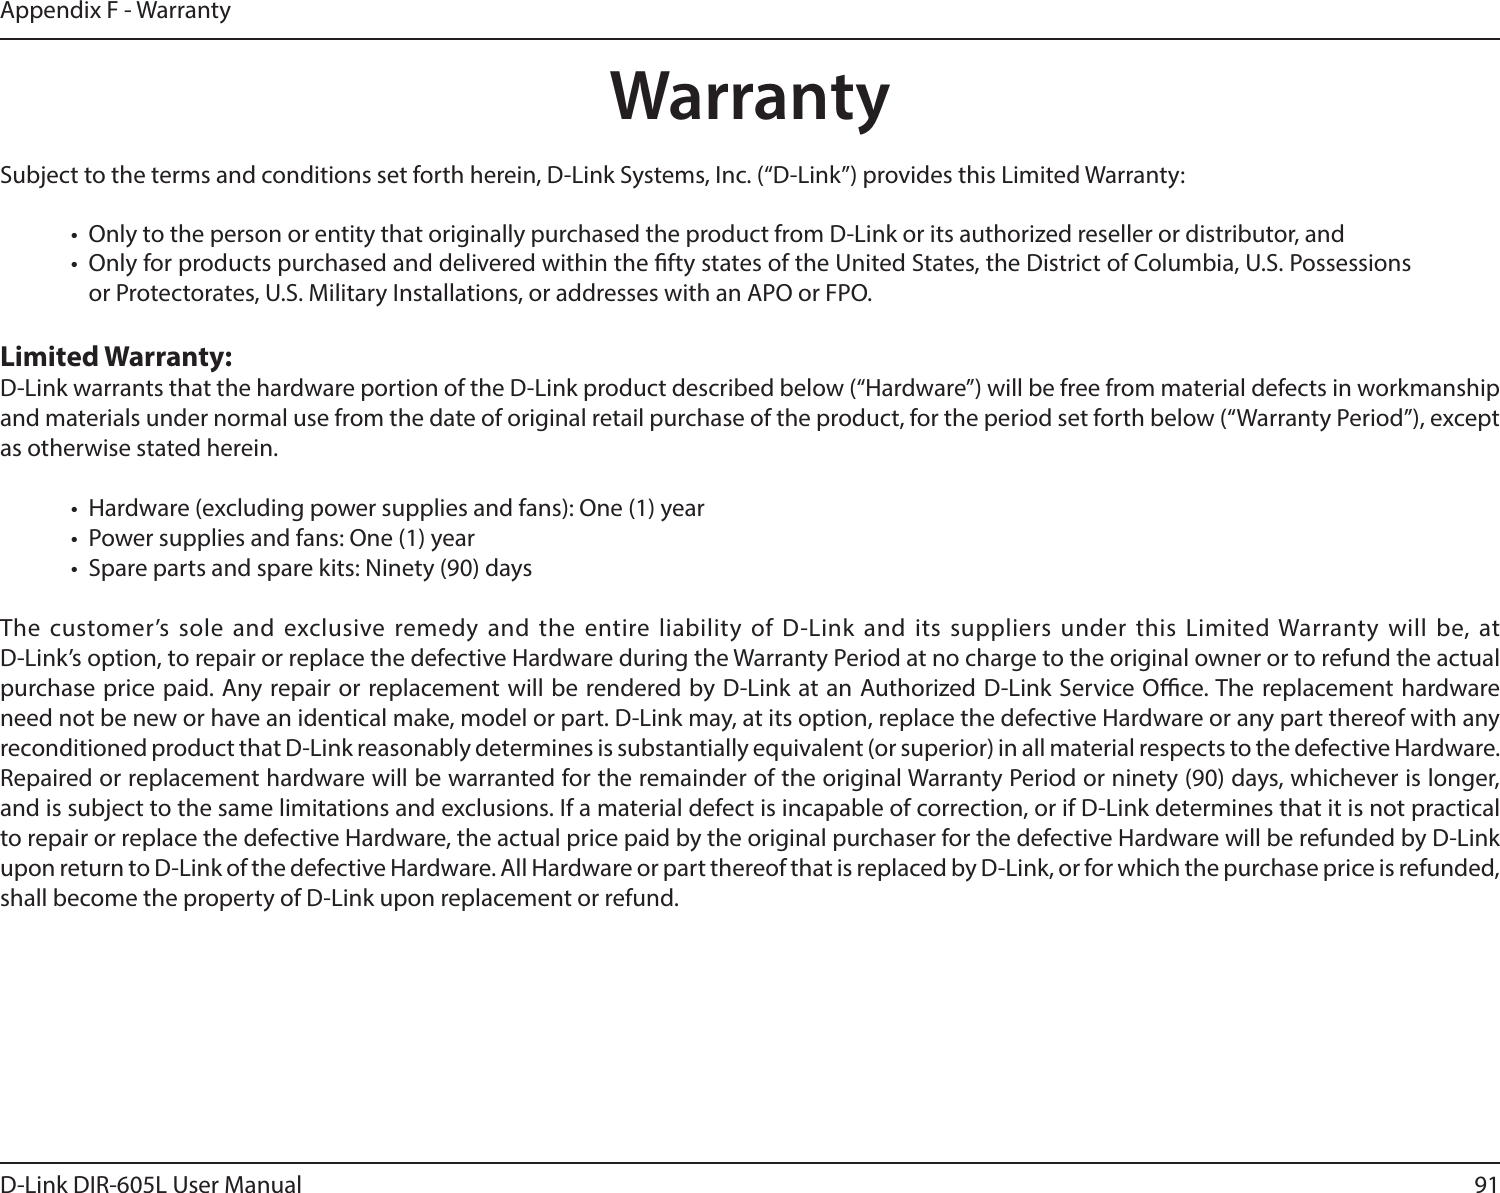 91D-Link DIR-605L User ManualAppendix F - WarrantyWarrantySubject to the terms and conditions set forth herein, D-Link Systems, Inc. (“D-Link”) provides this Limited Warranty:•  Only to the person or entity that originally purchased the product from D-Link or its authorized reseller or distributor, and•  Only for products purchased and delivered within the fty states of the United States, the District of Columbia, U.S. Possessions or Protectorates, U.S. Military Installations, or addresses with an APO or FPO.Limited Warranty:D-Link warrants that the hardware portion of the D-Link product described below (“Hardware”) will be free from material defects in workmanship and materials under normal use from the date of original retail purchase of the product, for the period set forth below (“Warranty Period”), except as otherwise stated herein.•  Hardware (excluding power supplies and fans): One (1) year•  Power supplies and fans: One (1) year•  Spare parts and spare kits: Ninety (90) daysThe customer’s sole and exclusive remedy and the entire liability of D-Link and its suppliers under this Limited Warranty will be, at  D-Link’s option, to repair or replace the defective Hardware during the Warranty Period at no charge to the original owner or to refund the actual purchase price paid. Any repair or replacement will be rendered by D-Link at an Authorized D-Link Service Oce. The replacement hardware need not be new or have an identical make, model or part. D-Link may, at its option, replace the defective Hardware or any part thereof with any reconditioned product that D-Link reasonably determines is substantially equivalent (or superior) in all material respects to the defective Hardware. Repaired or replacement hardware will be warranted for the remainder of the original Warranty Period or ninety (90) days, whichever is longer, and is subject to the same limitations and exclusions. If a material defect is incapable of correction, or if D-Link determines that it is not practical to repair or replace the defective Hardware, the actual price paid by the original purchaser for the defective Hardware will be refunded by D-Link upon return to D-Link of the defective Hardware. All Hardware or part thereof that is replaced by D-Link, or for which the purchase price is refunded, shall become the property of D-Link upon replacement or refund.